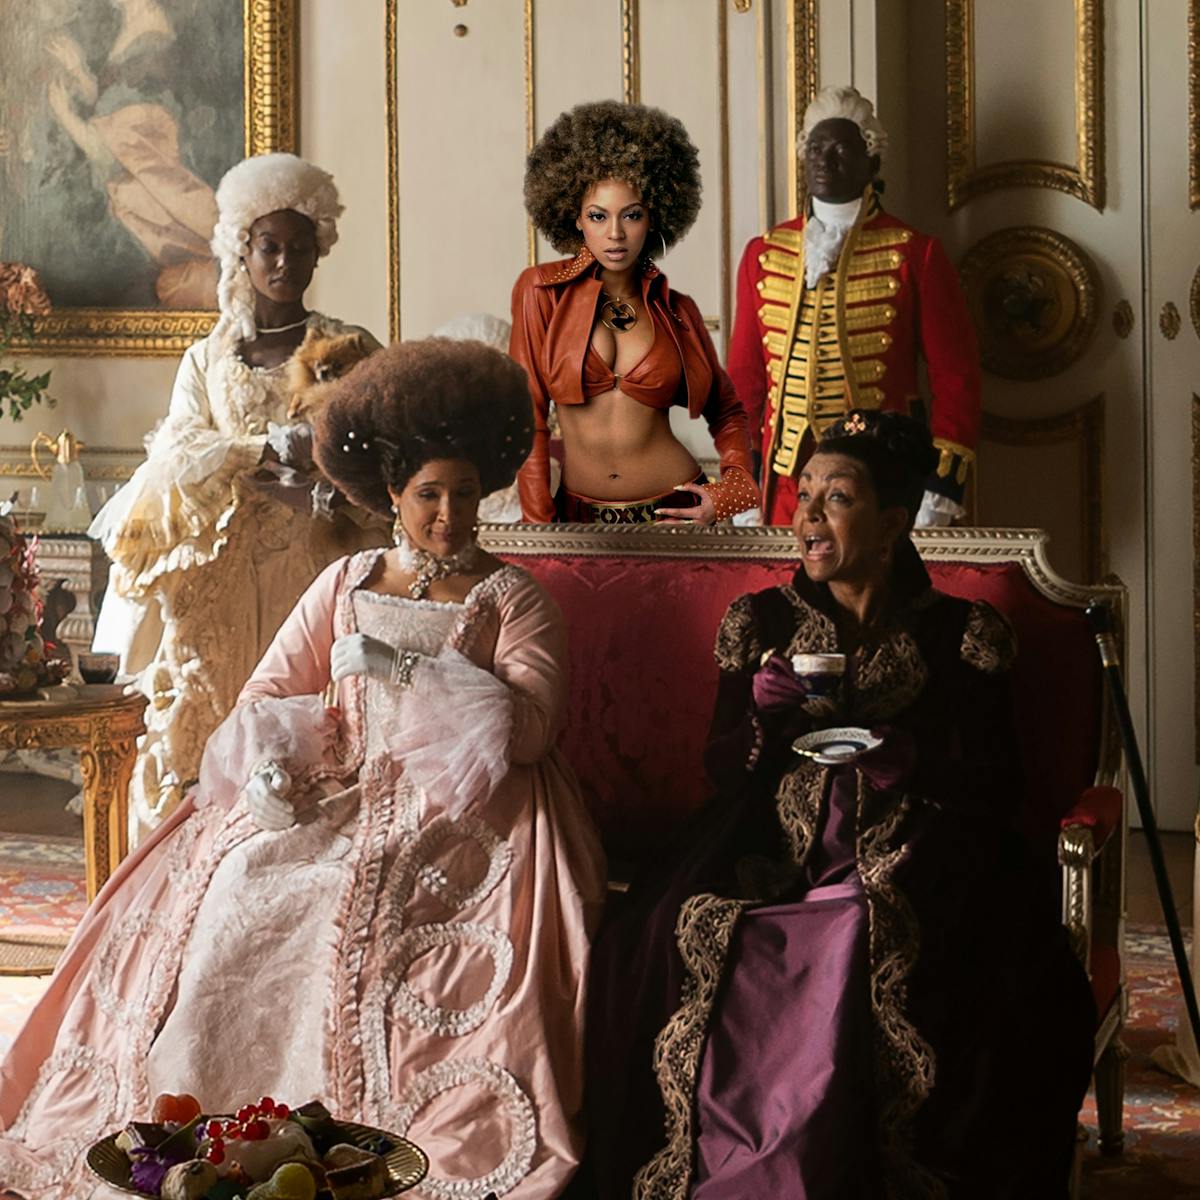 Queen Charlotte (Golda Rosheuvel), Foxxy Cleopatra (Beyoncé) in Austin Powers in Goldmember, and Lady Danbury (Adjoa Andoh). Sit around an ornate living room.  